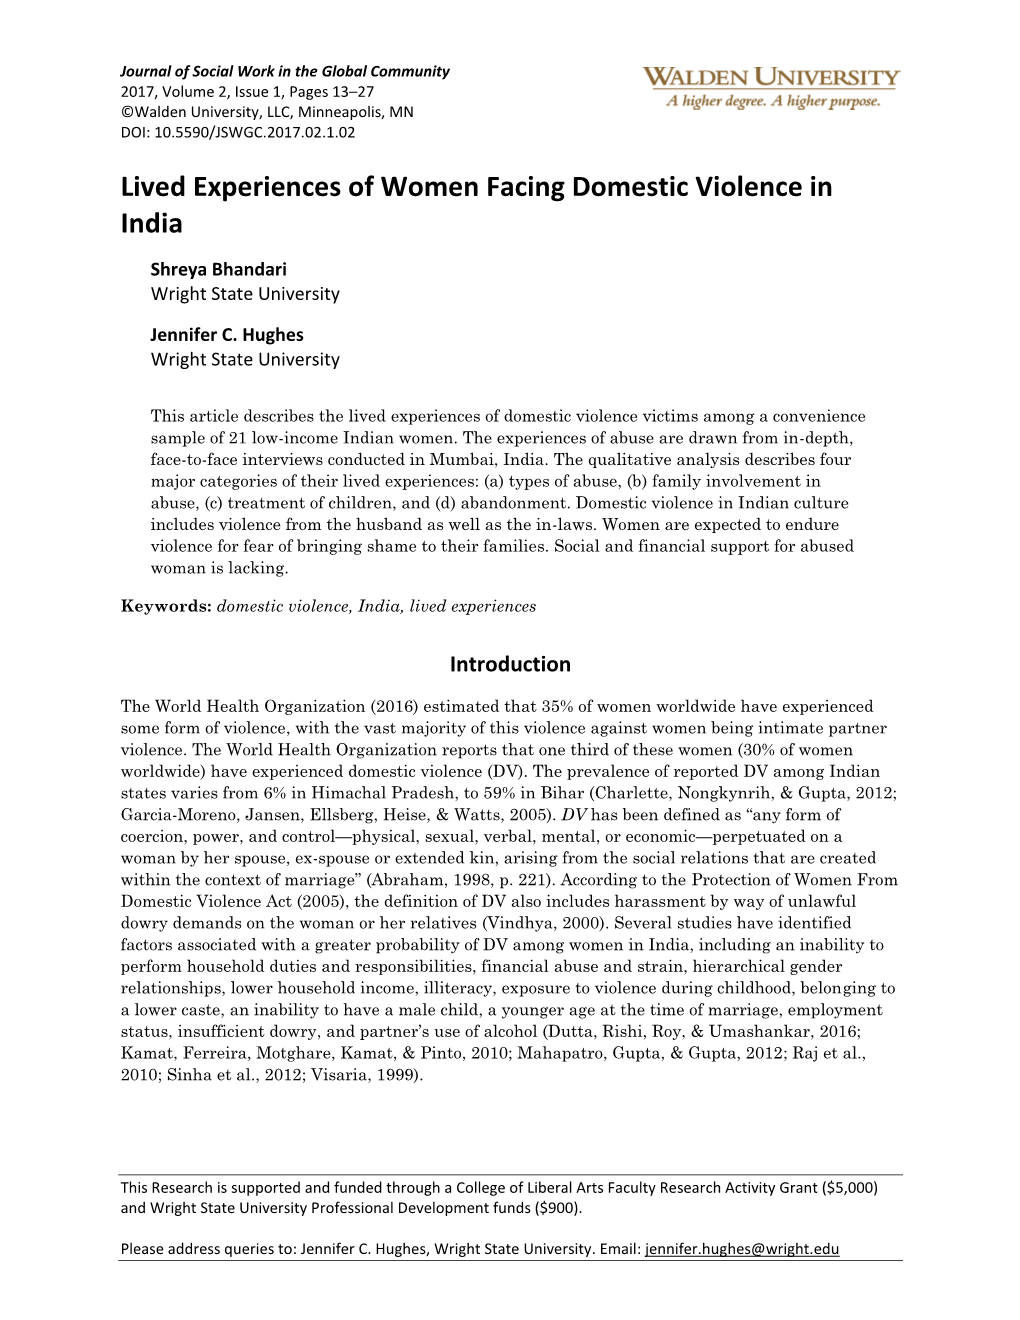 Lived Experiences of Women Facing Domestic Violence in India